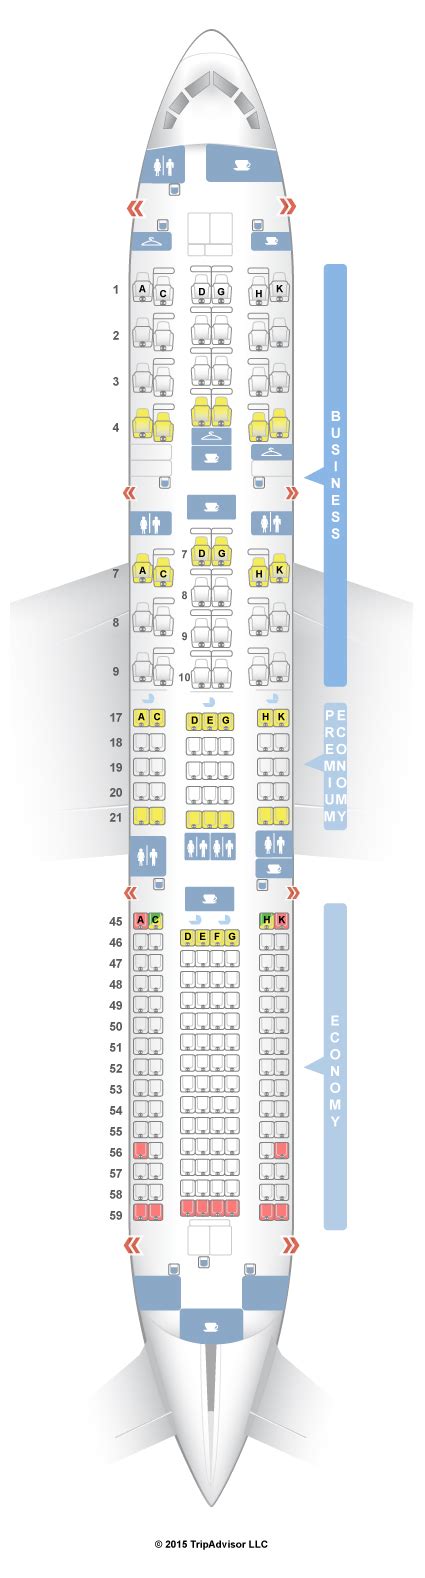 jal boeing 787 seat map